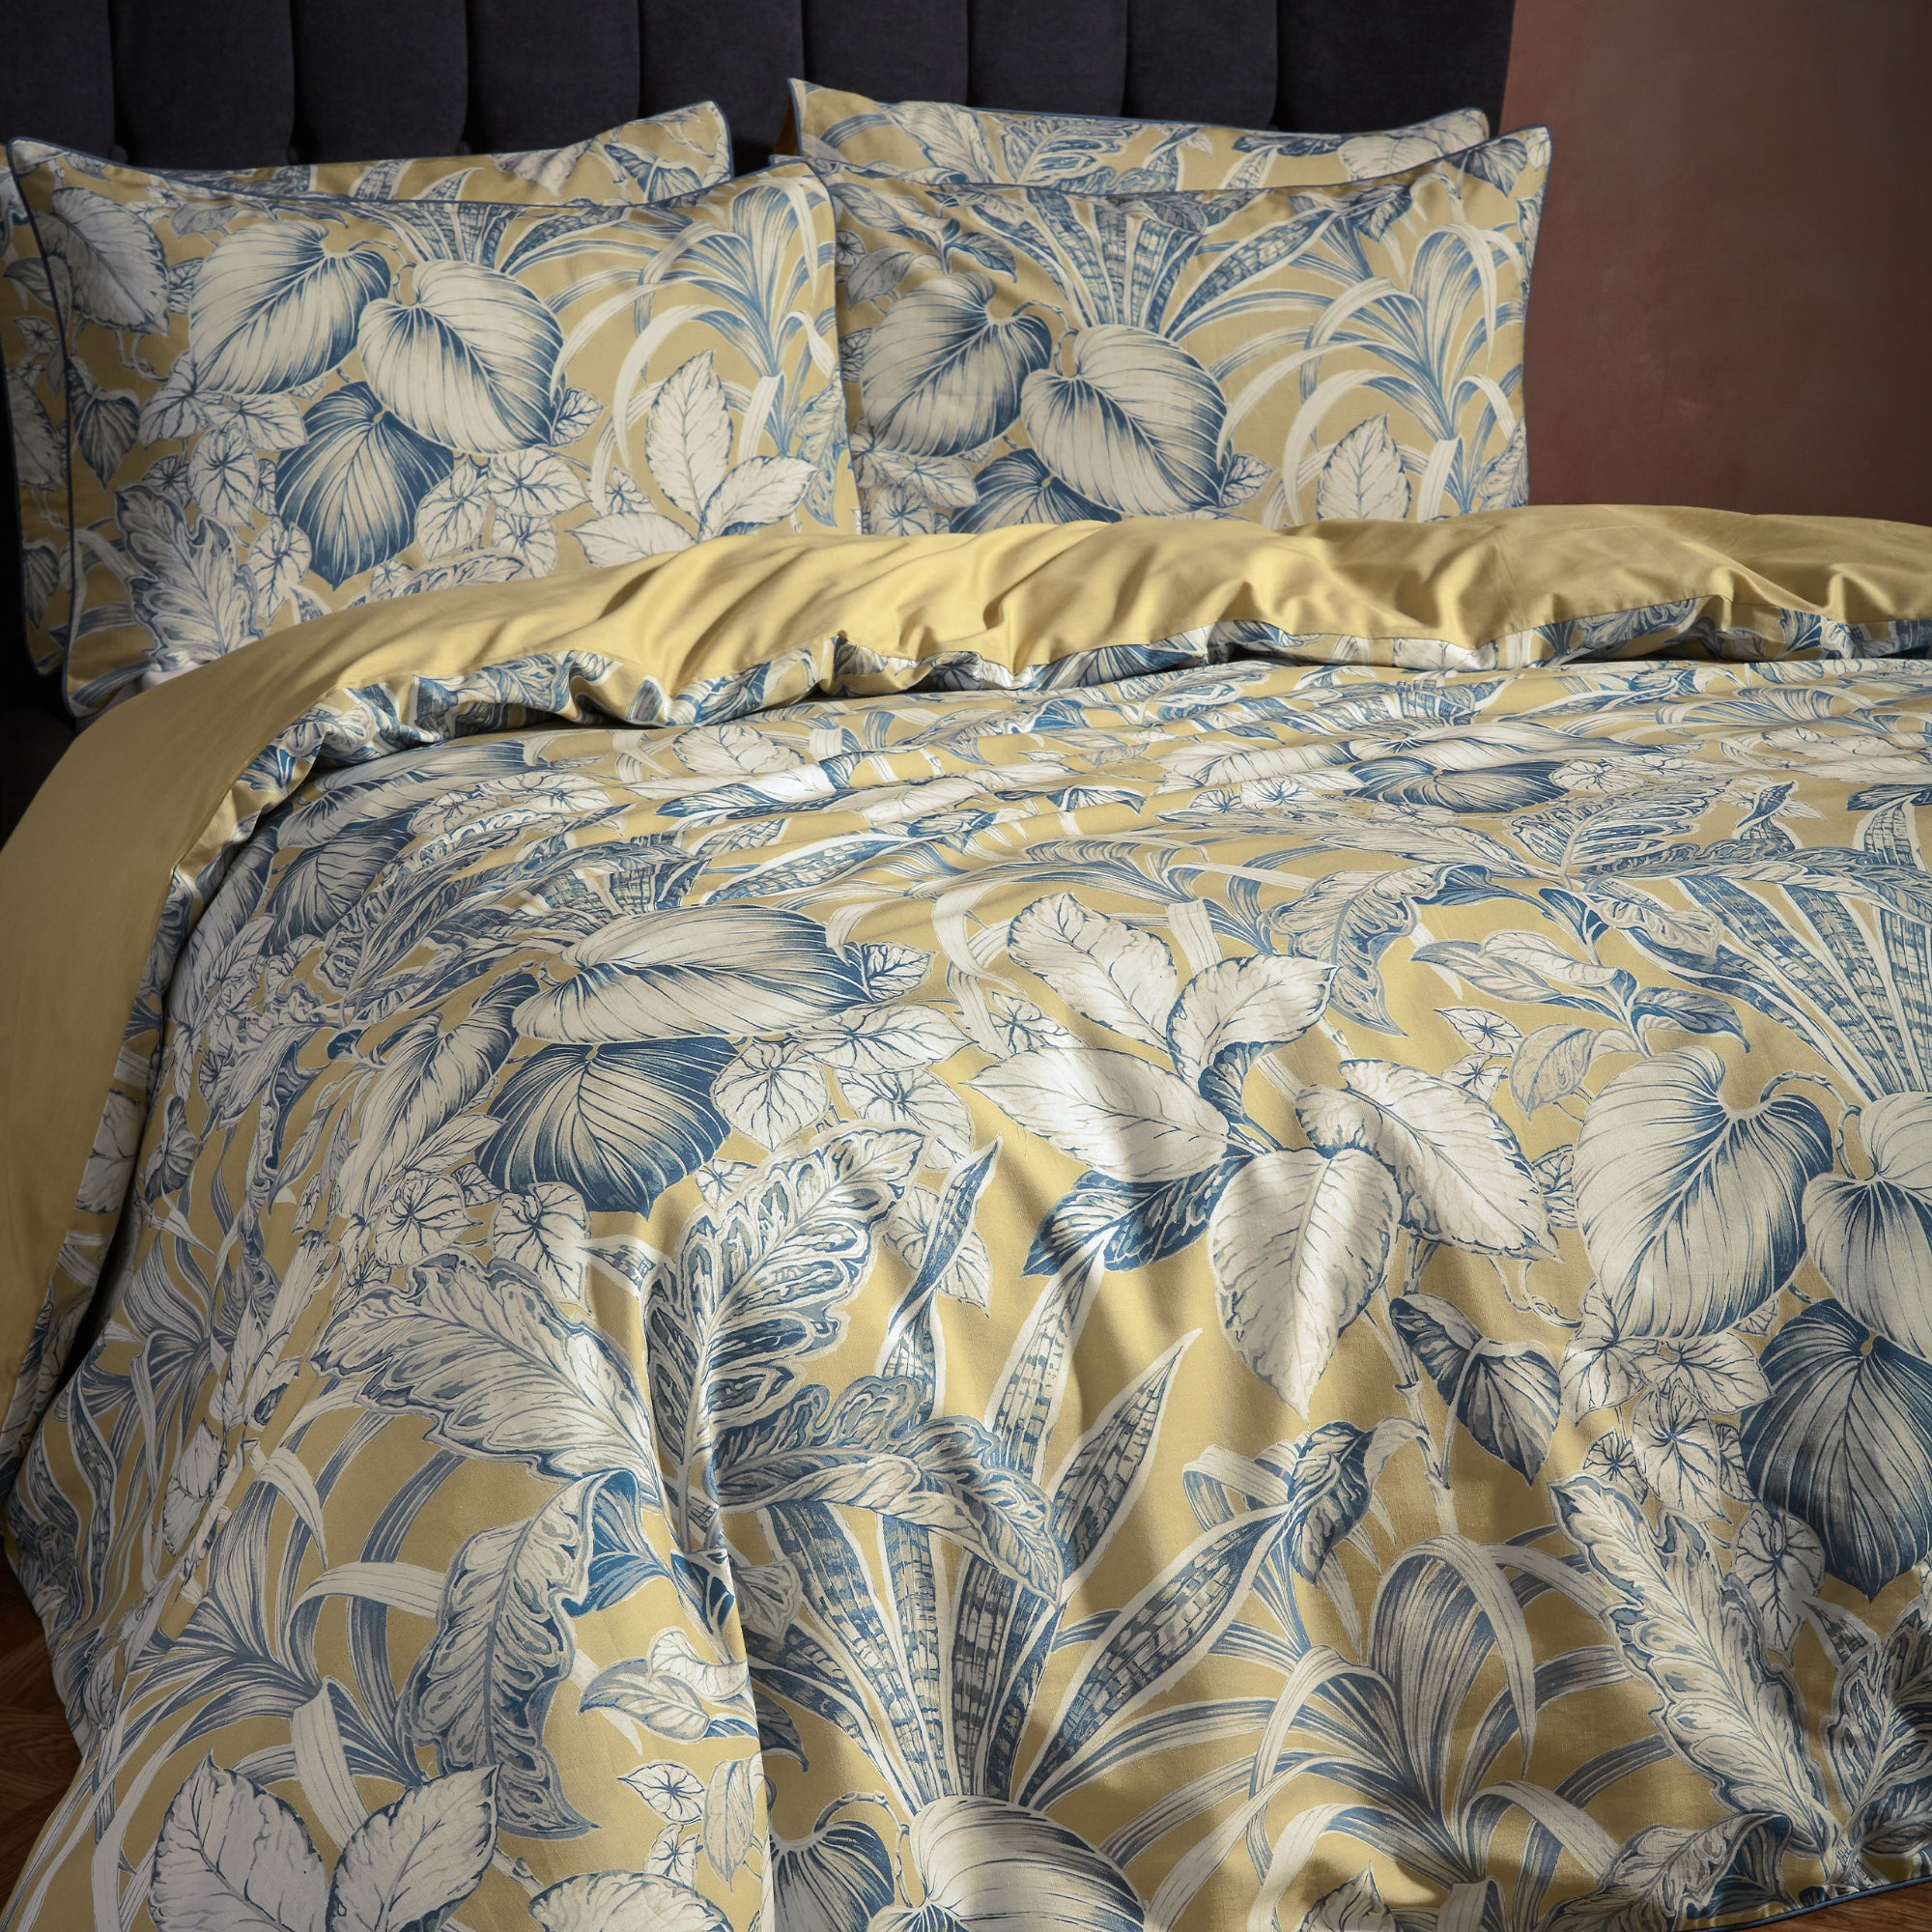 Duvet Covers & Sets - Bedding Collections | Dunelm | Page 10